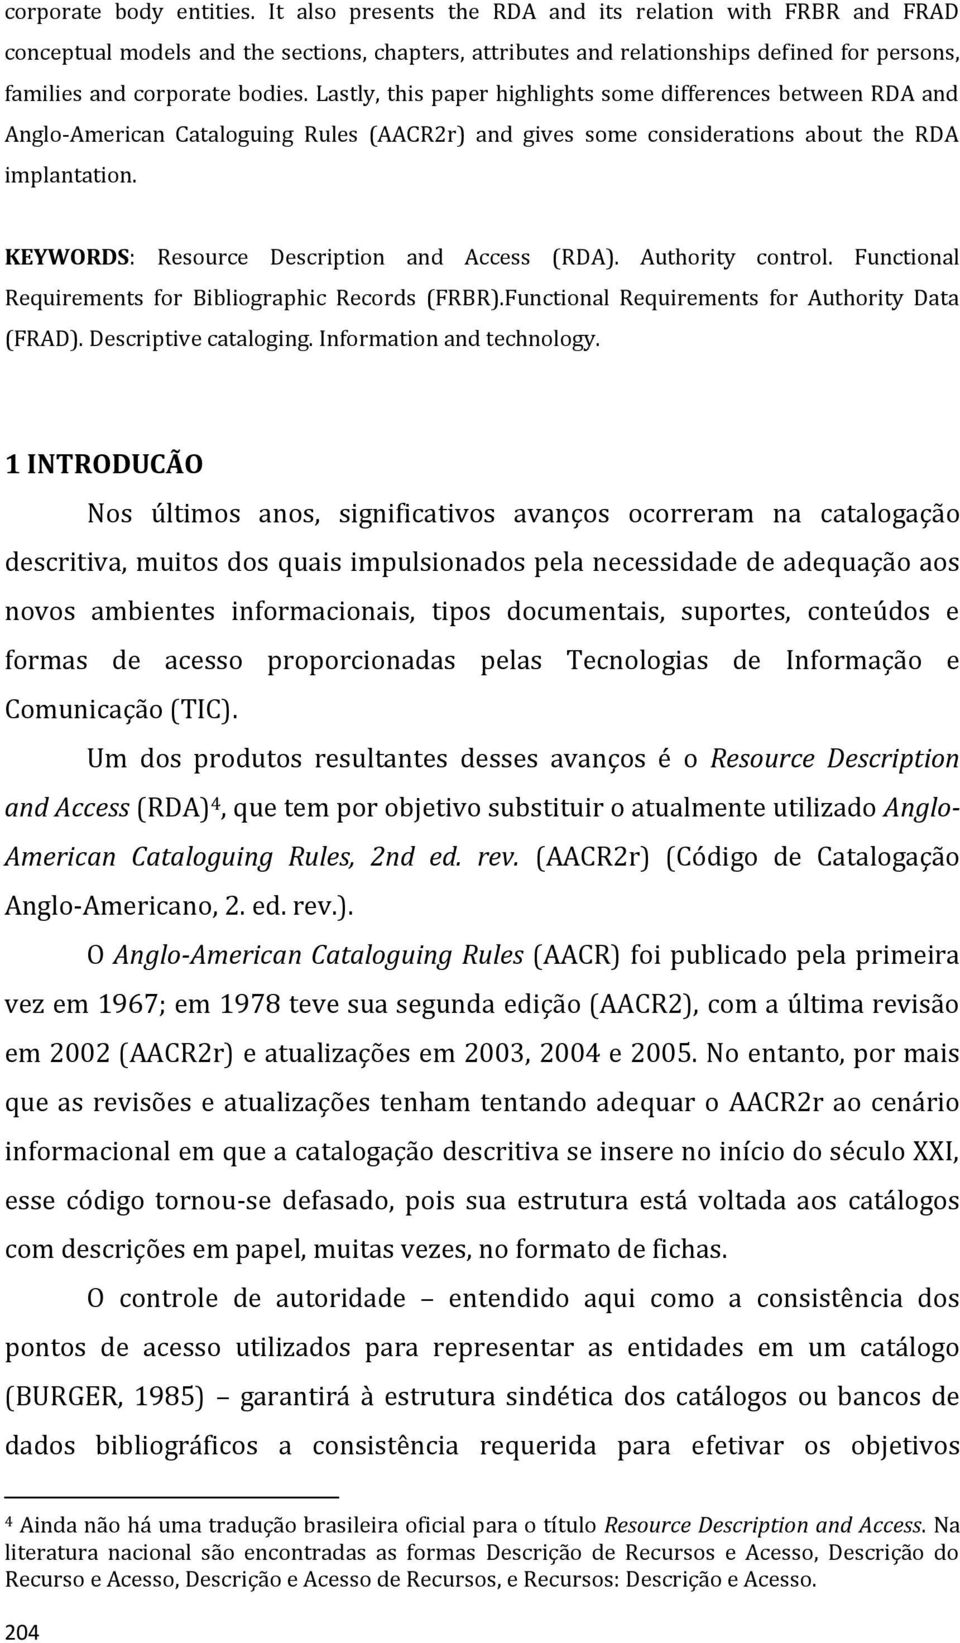 Lastly, this paper highlights some differences between RDA and Anglo-American Cataloguing Rules (AACR2r) and gives some considerations about the RDA implantation.